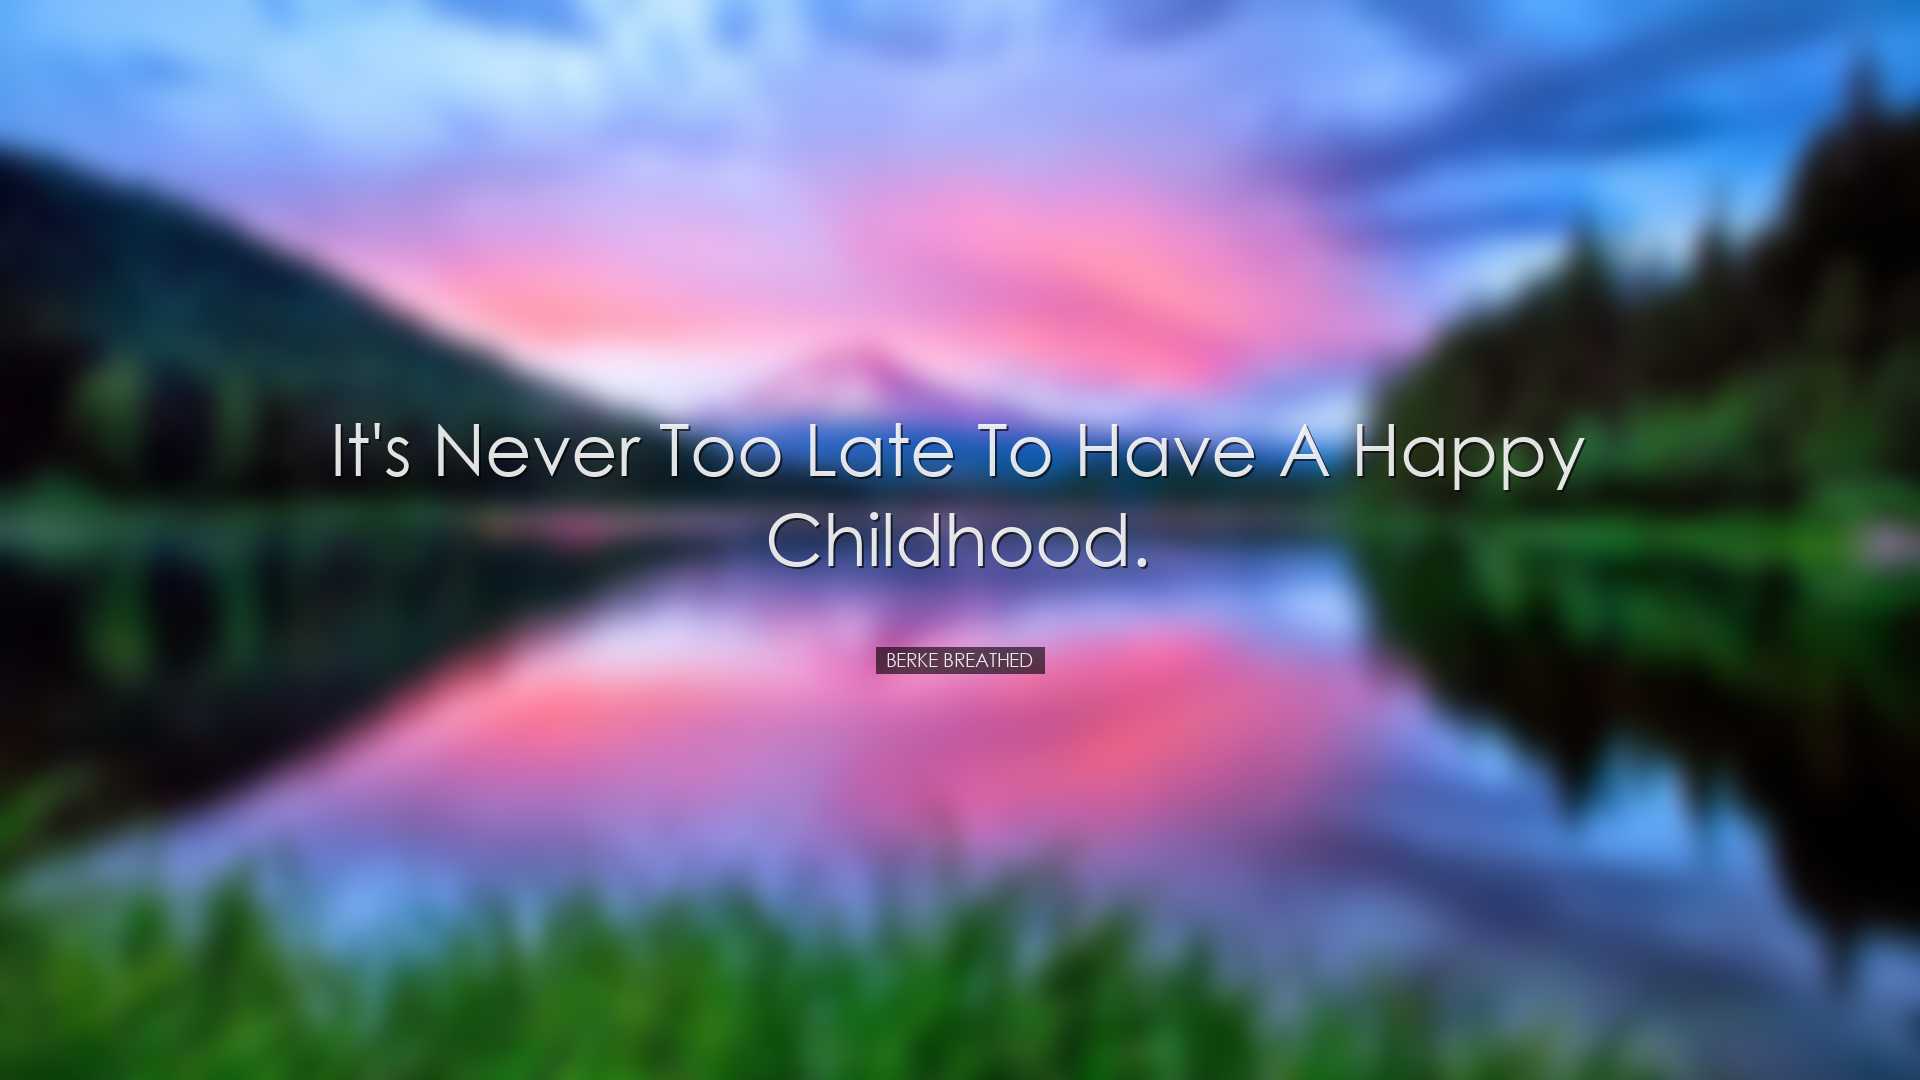 It's never too late to have a happy childhood. - Berke Breathed